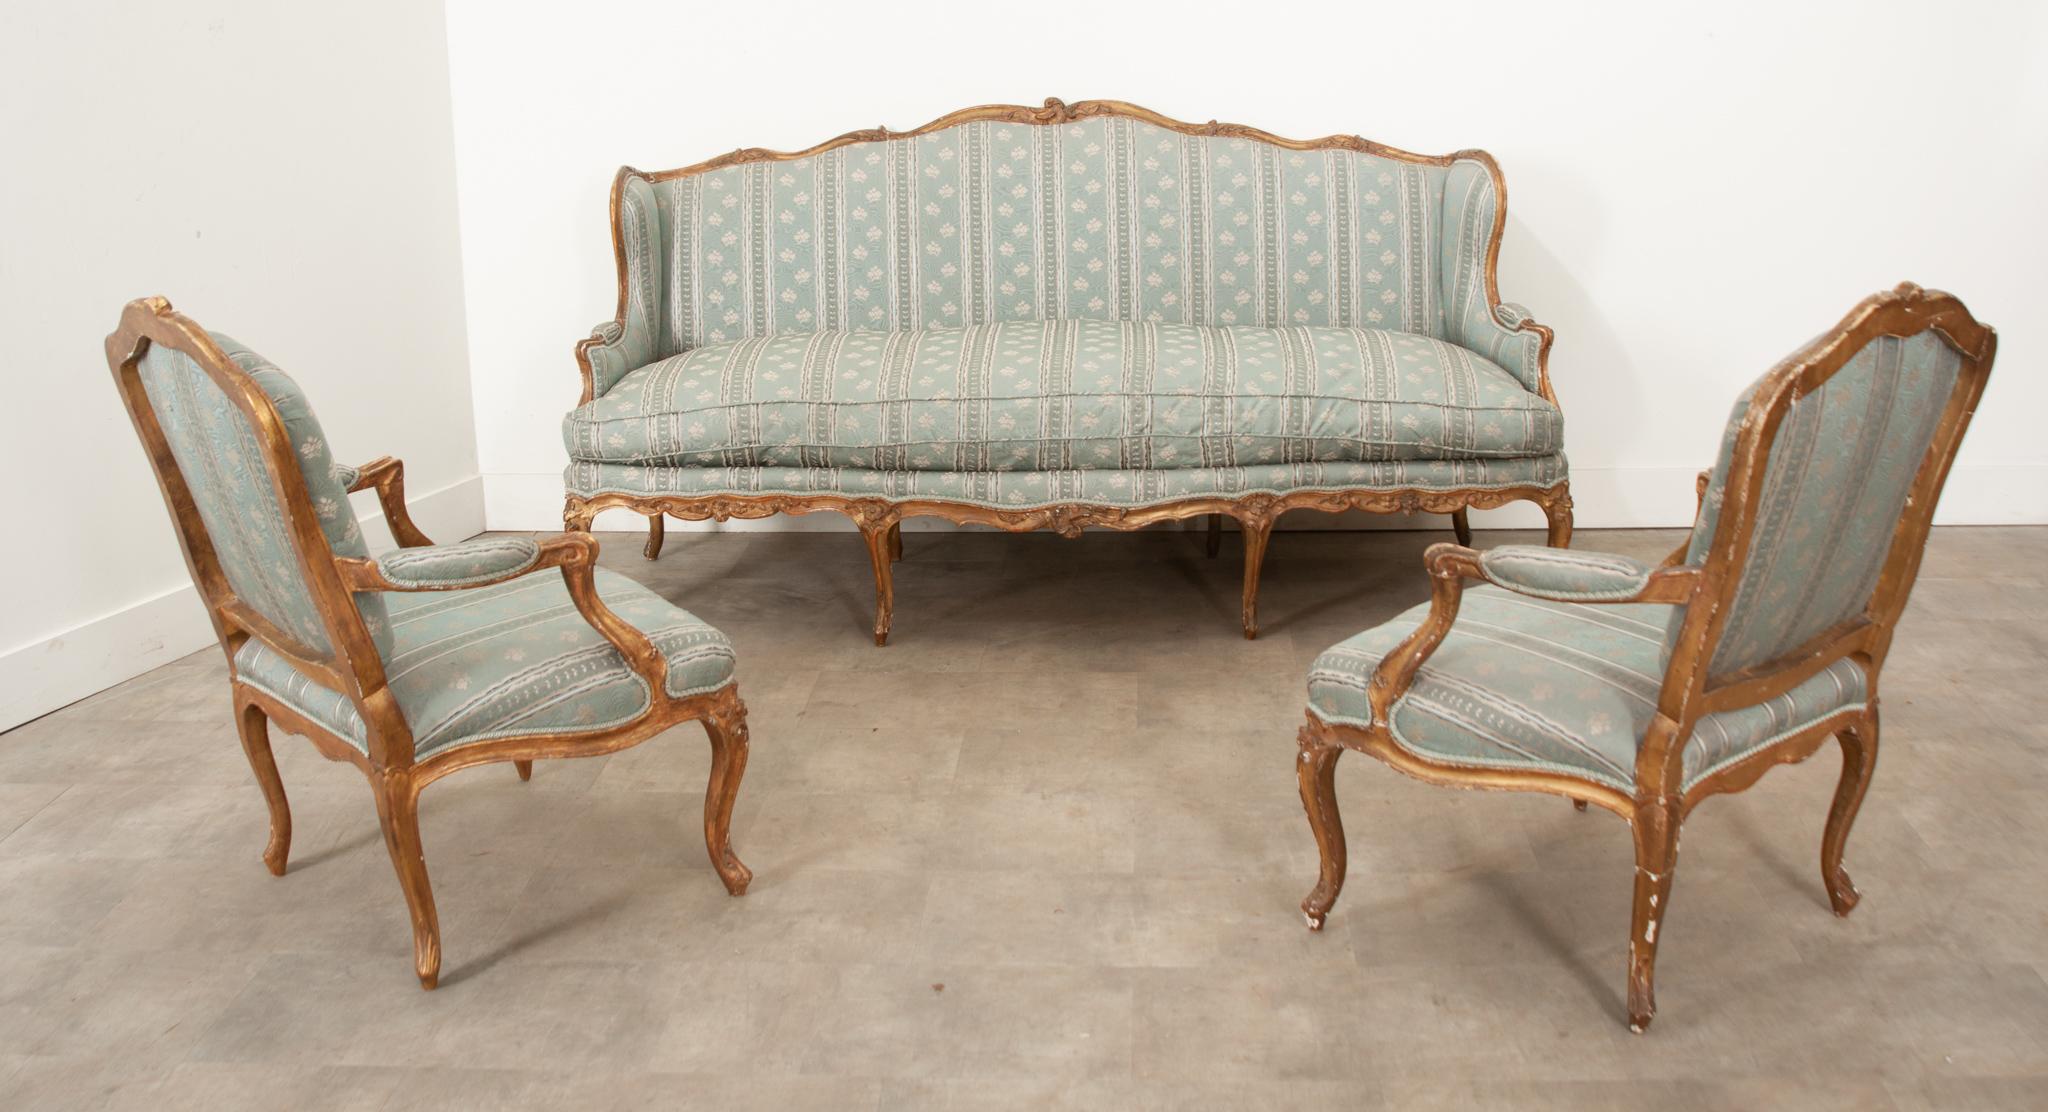 An early 19th century French Louis XV style gold giltwood 3-piece parlor salon suite. This lovely set includes a settee and two armchairs. All pieces feature vintage moire silk upholstery in a stunning pattern with florals and stripes, ribbon trim,